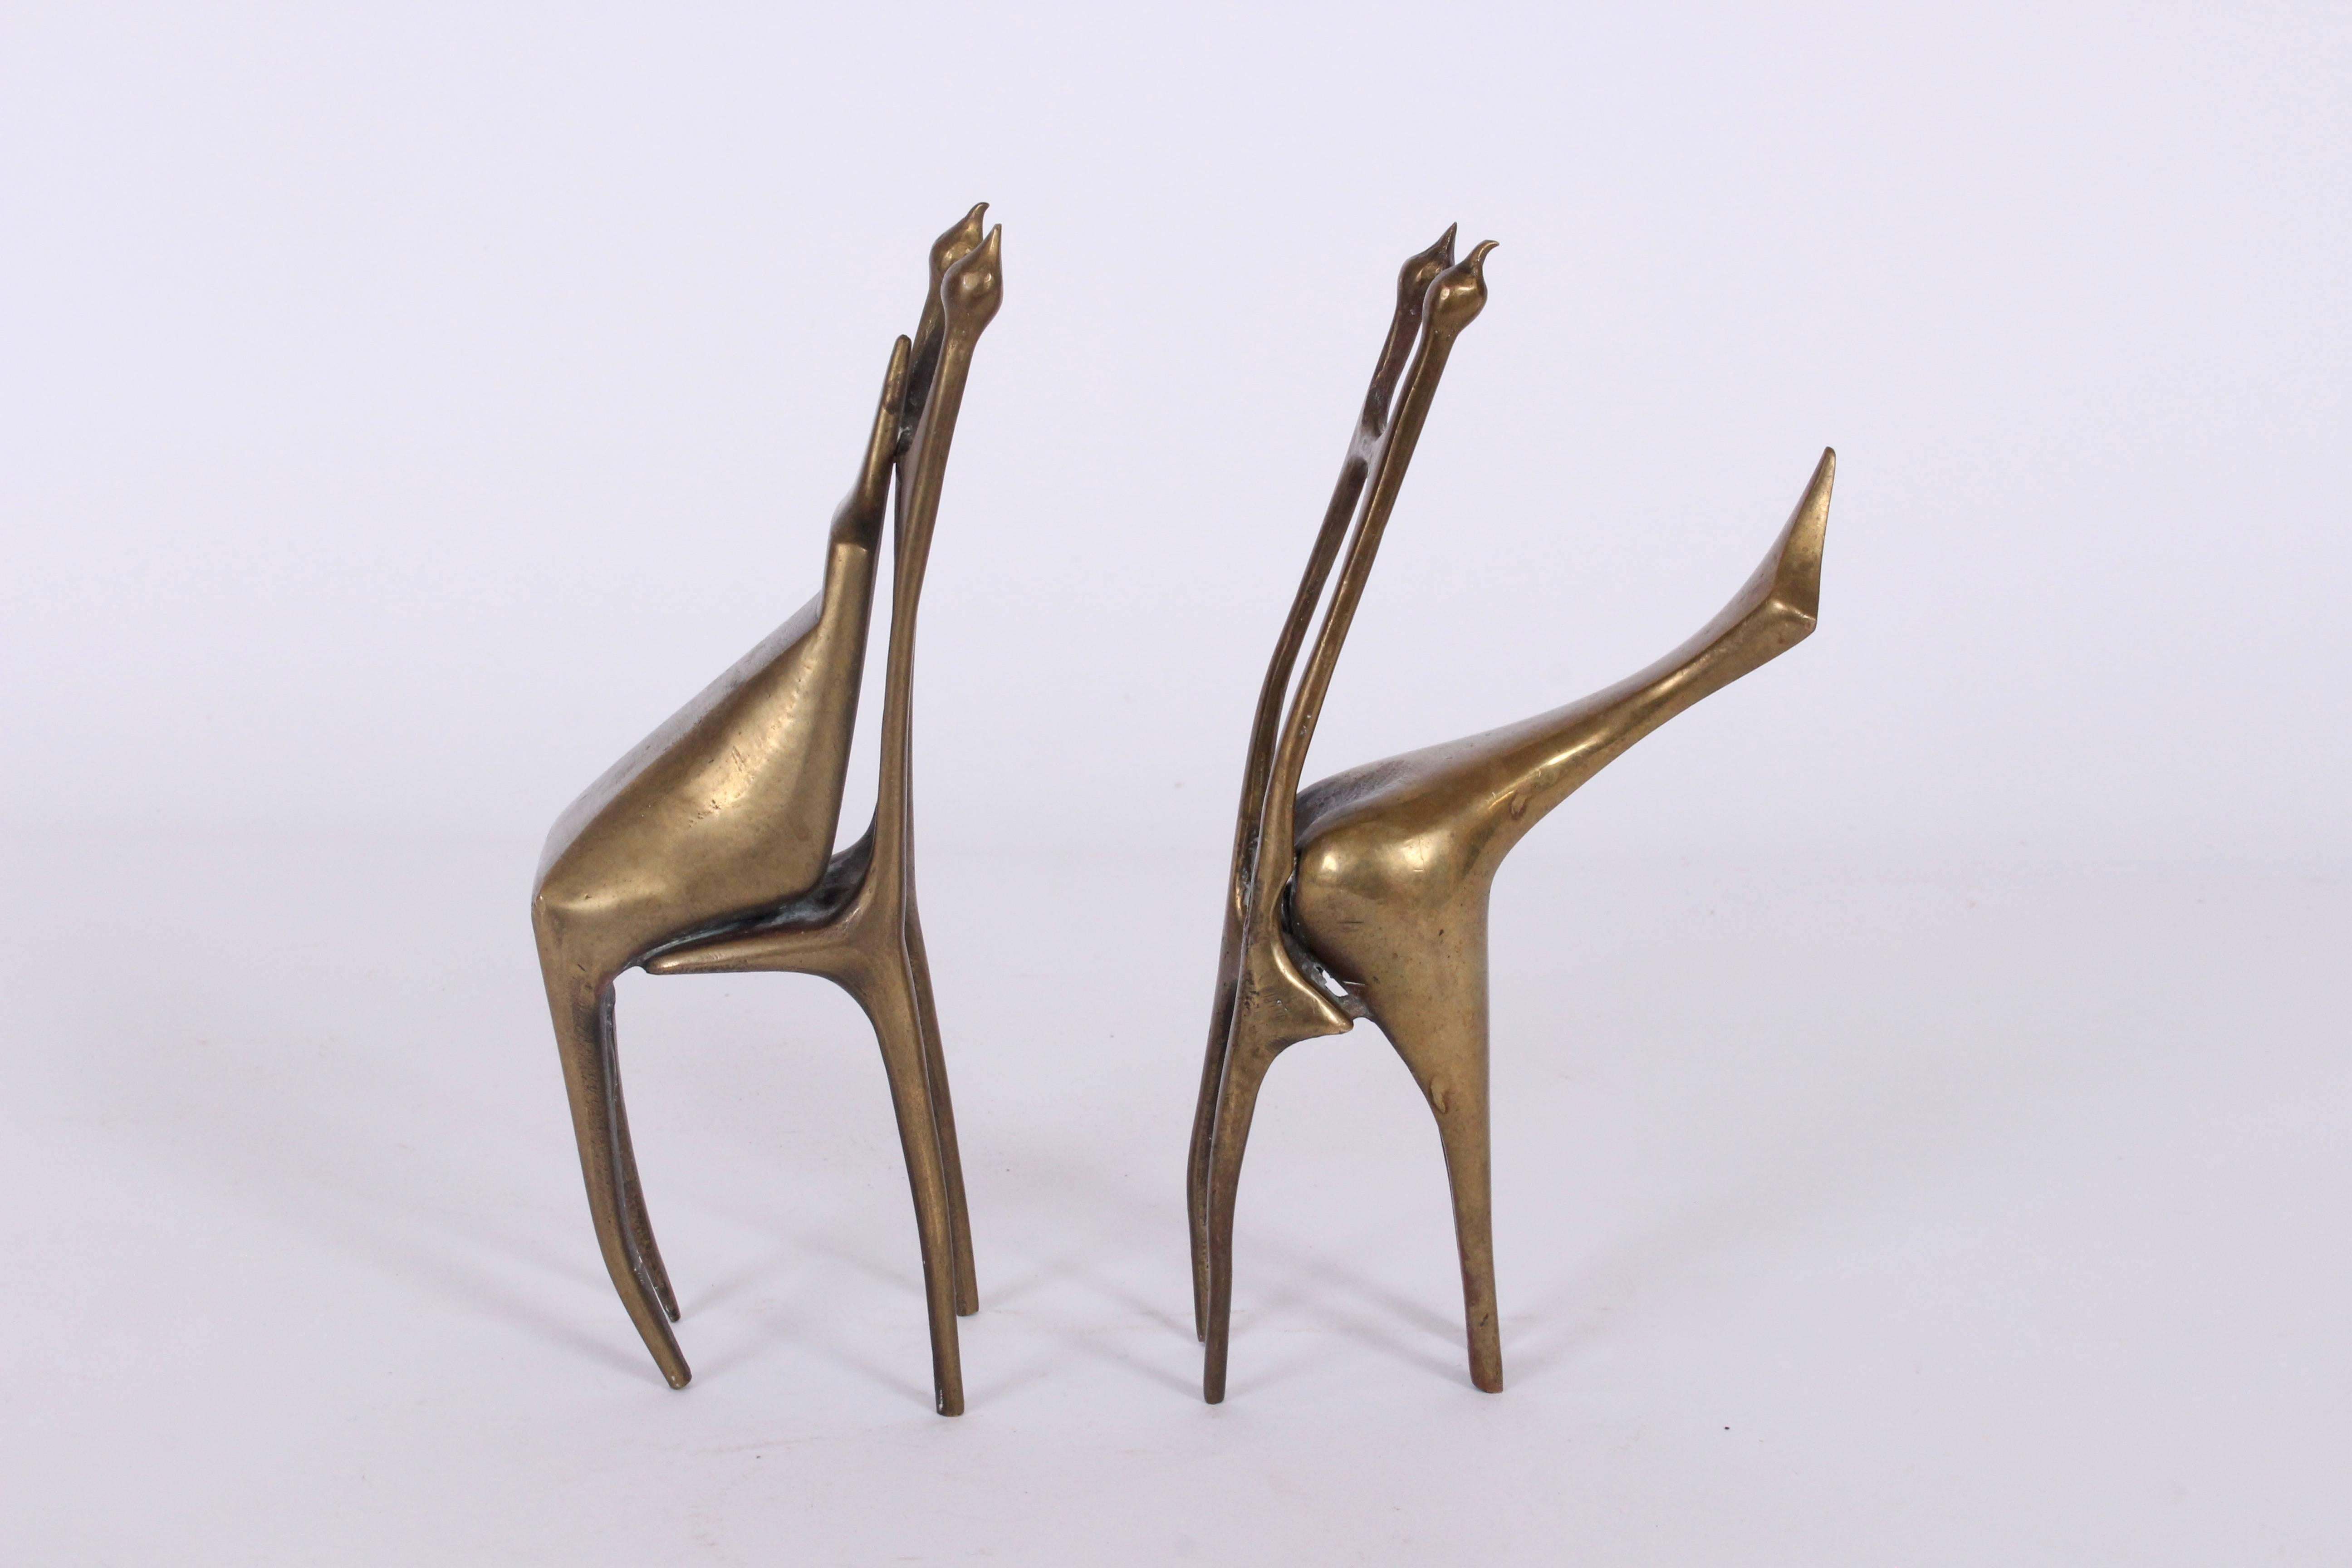 Smaller handcrafted studio solid Bronze balanced abstract sculptures. Featuring Chair like forms with seated, leaning figures. Modern. Post Surrealist. Signed AB 1977 3/9. Three in series of Nine.